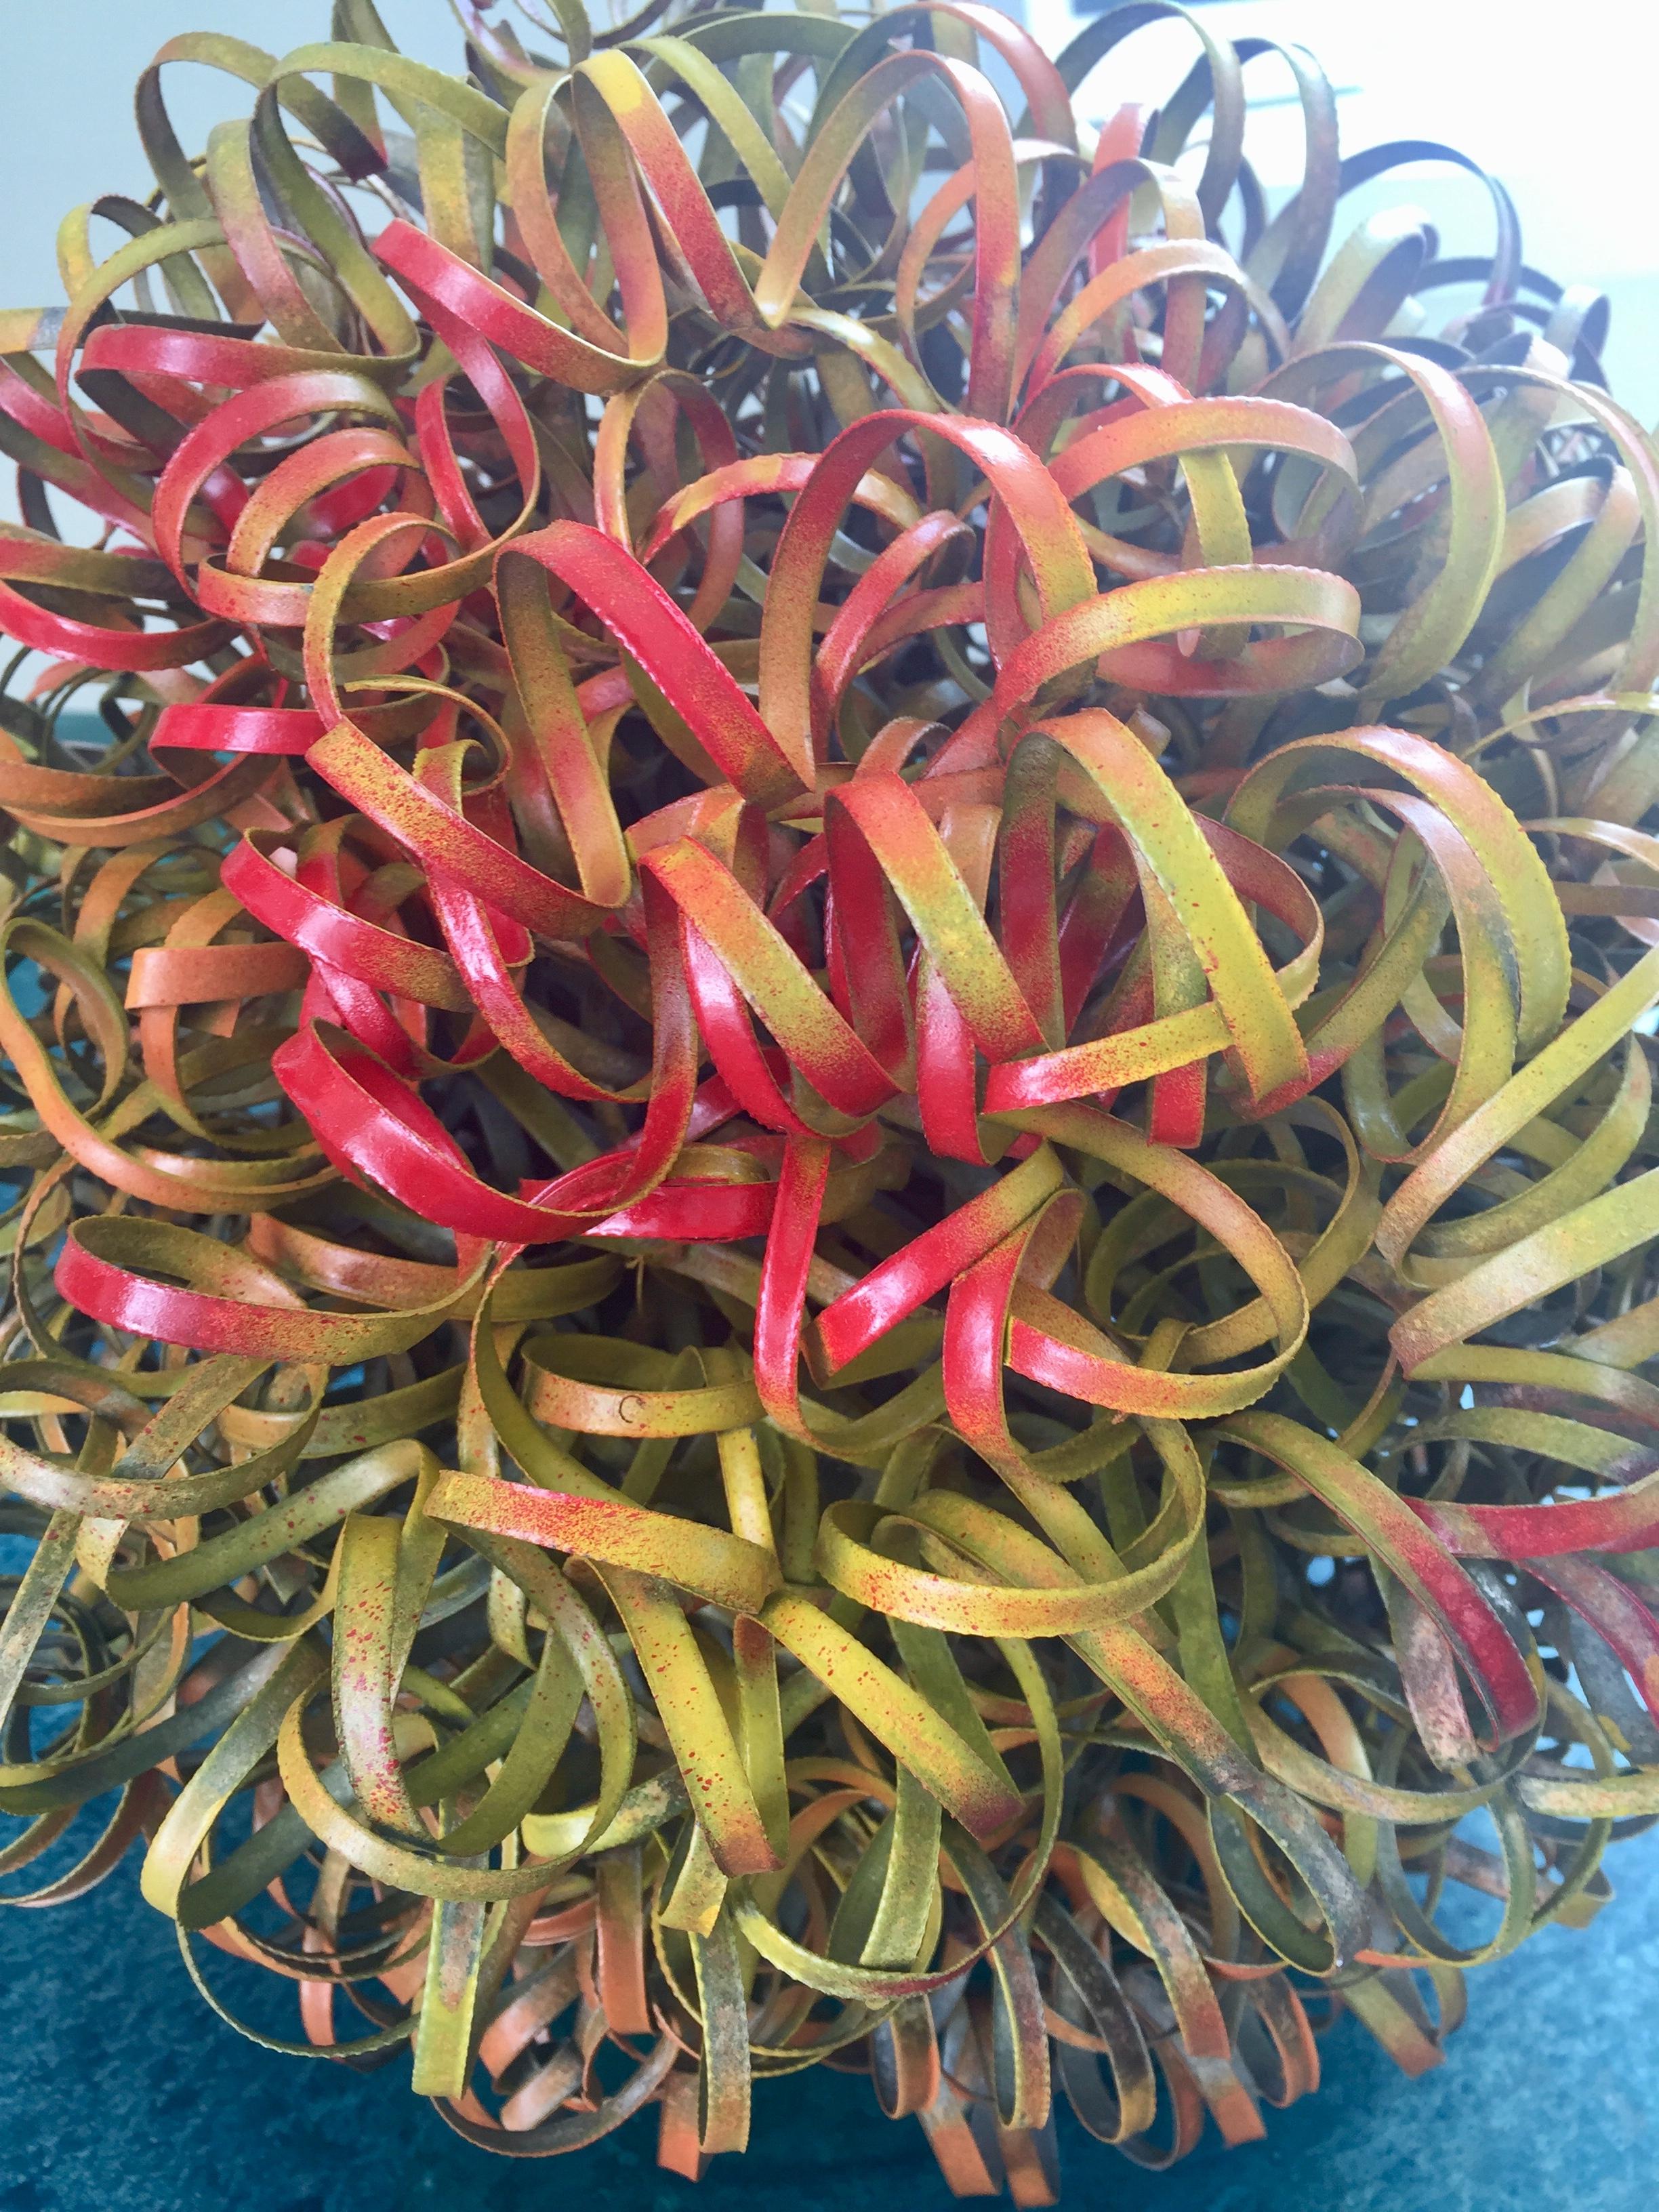 Copper Wire Spiral Ball Sculpture (Bright Red, Yellow, and Orange) For Sale 2